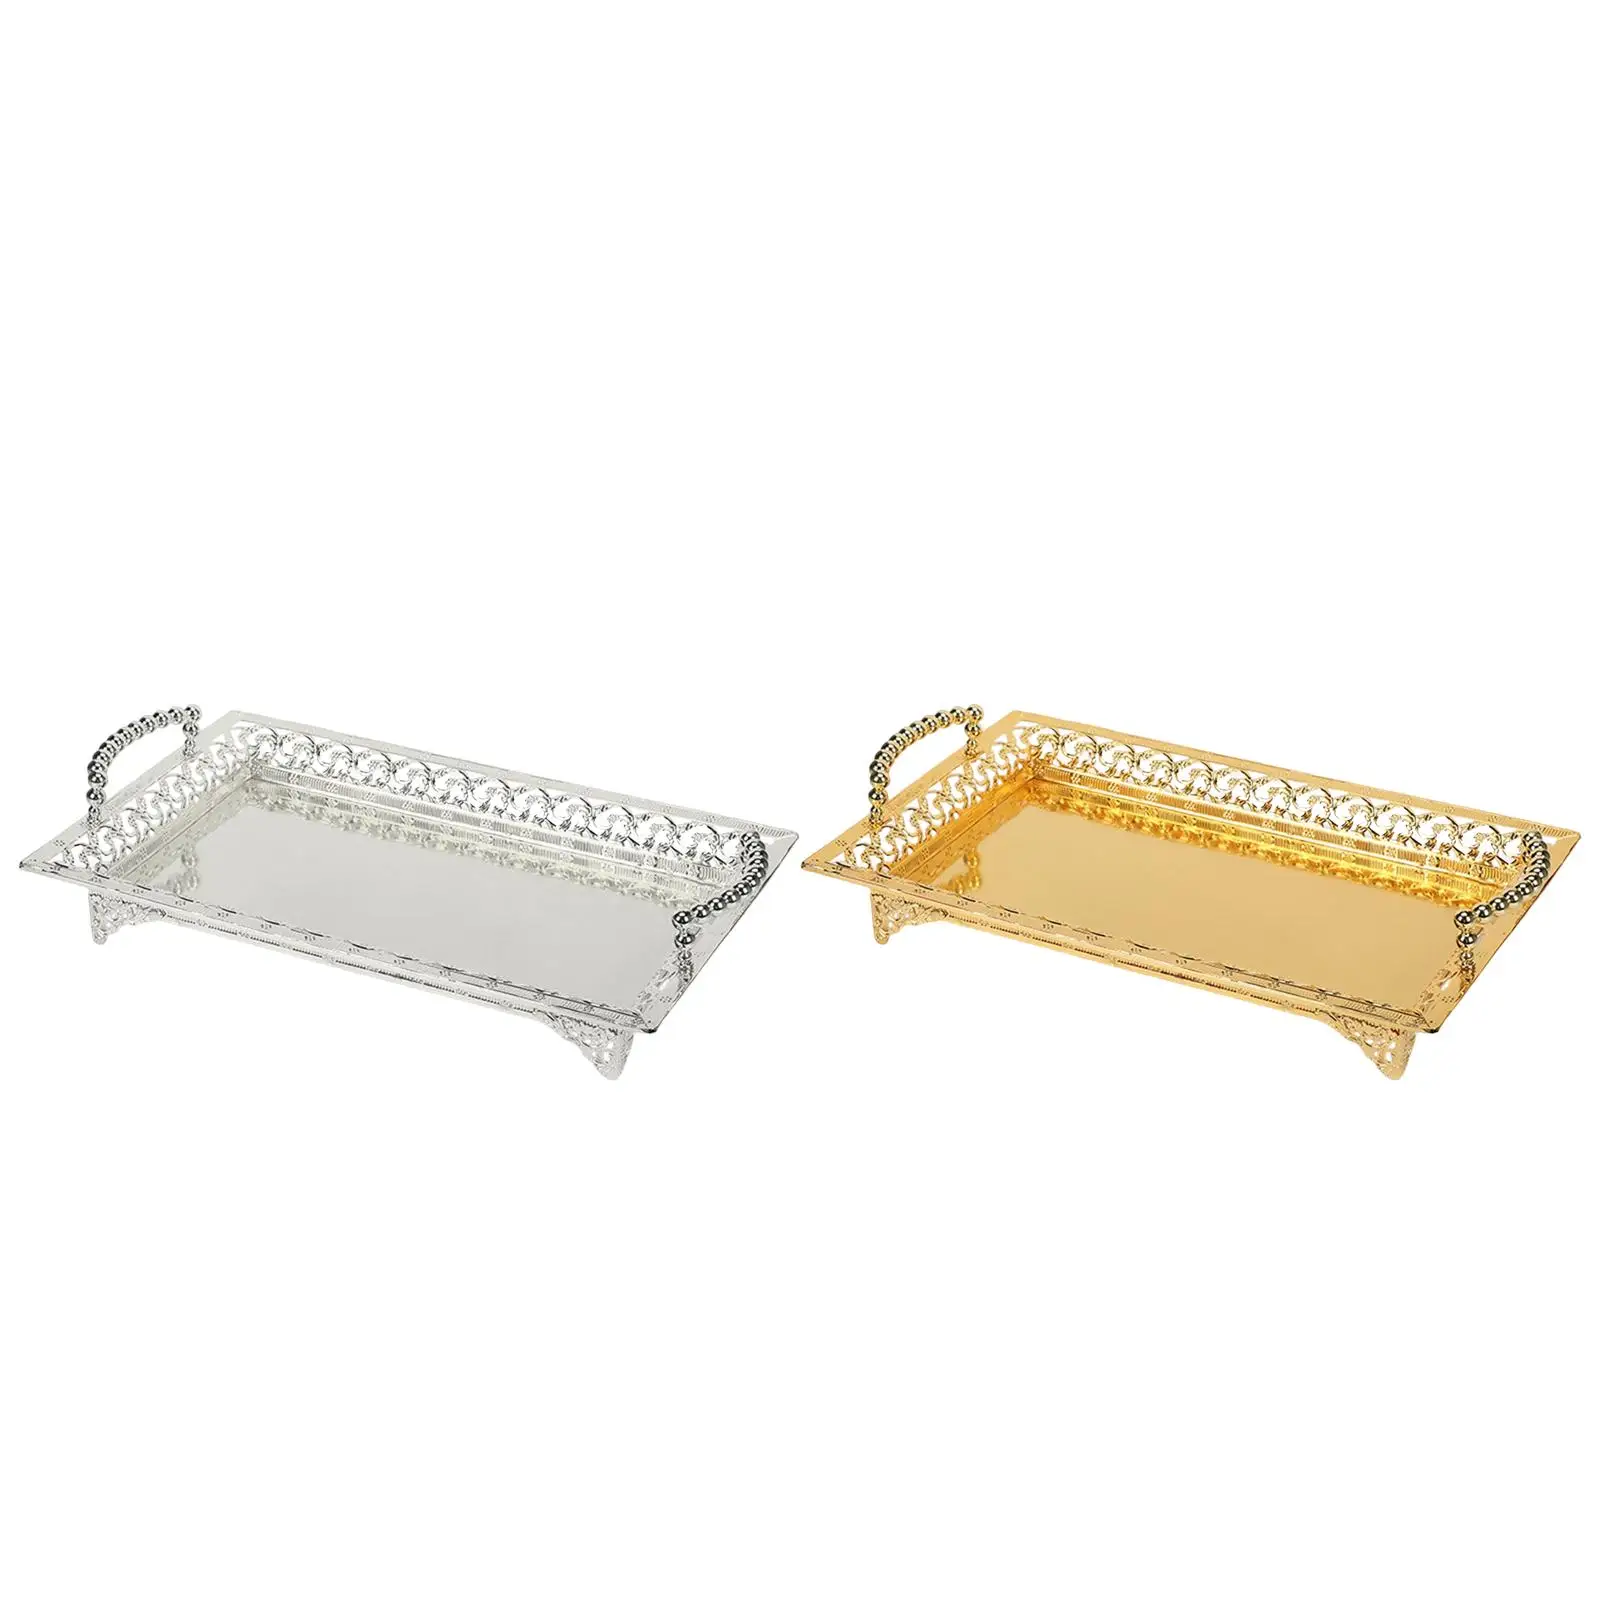 Nordic Style Fruit Storage Basket Storage Container Serving Platter Rectangle Serving Tray for Home kitchen Dessert Snack